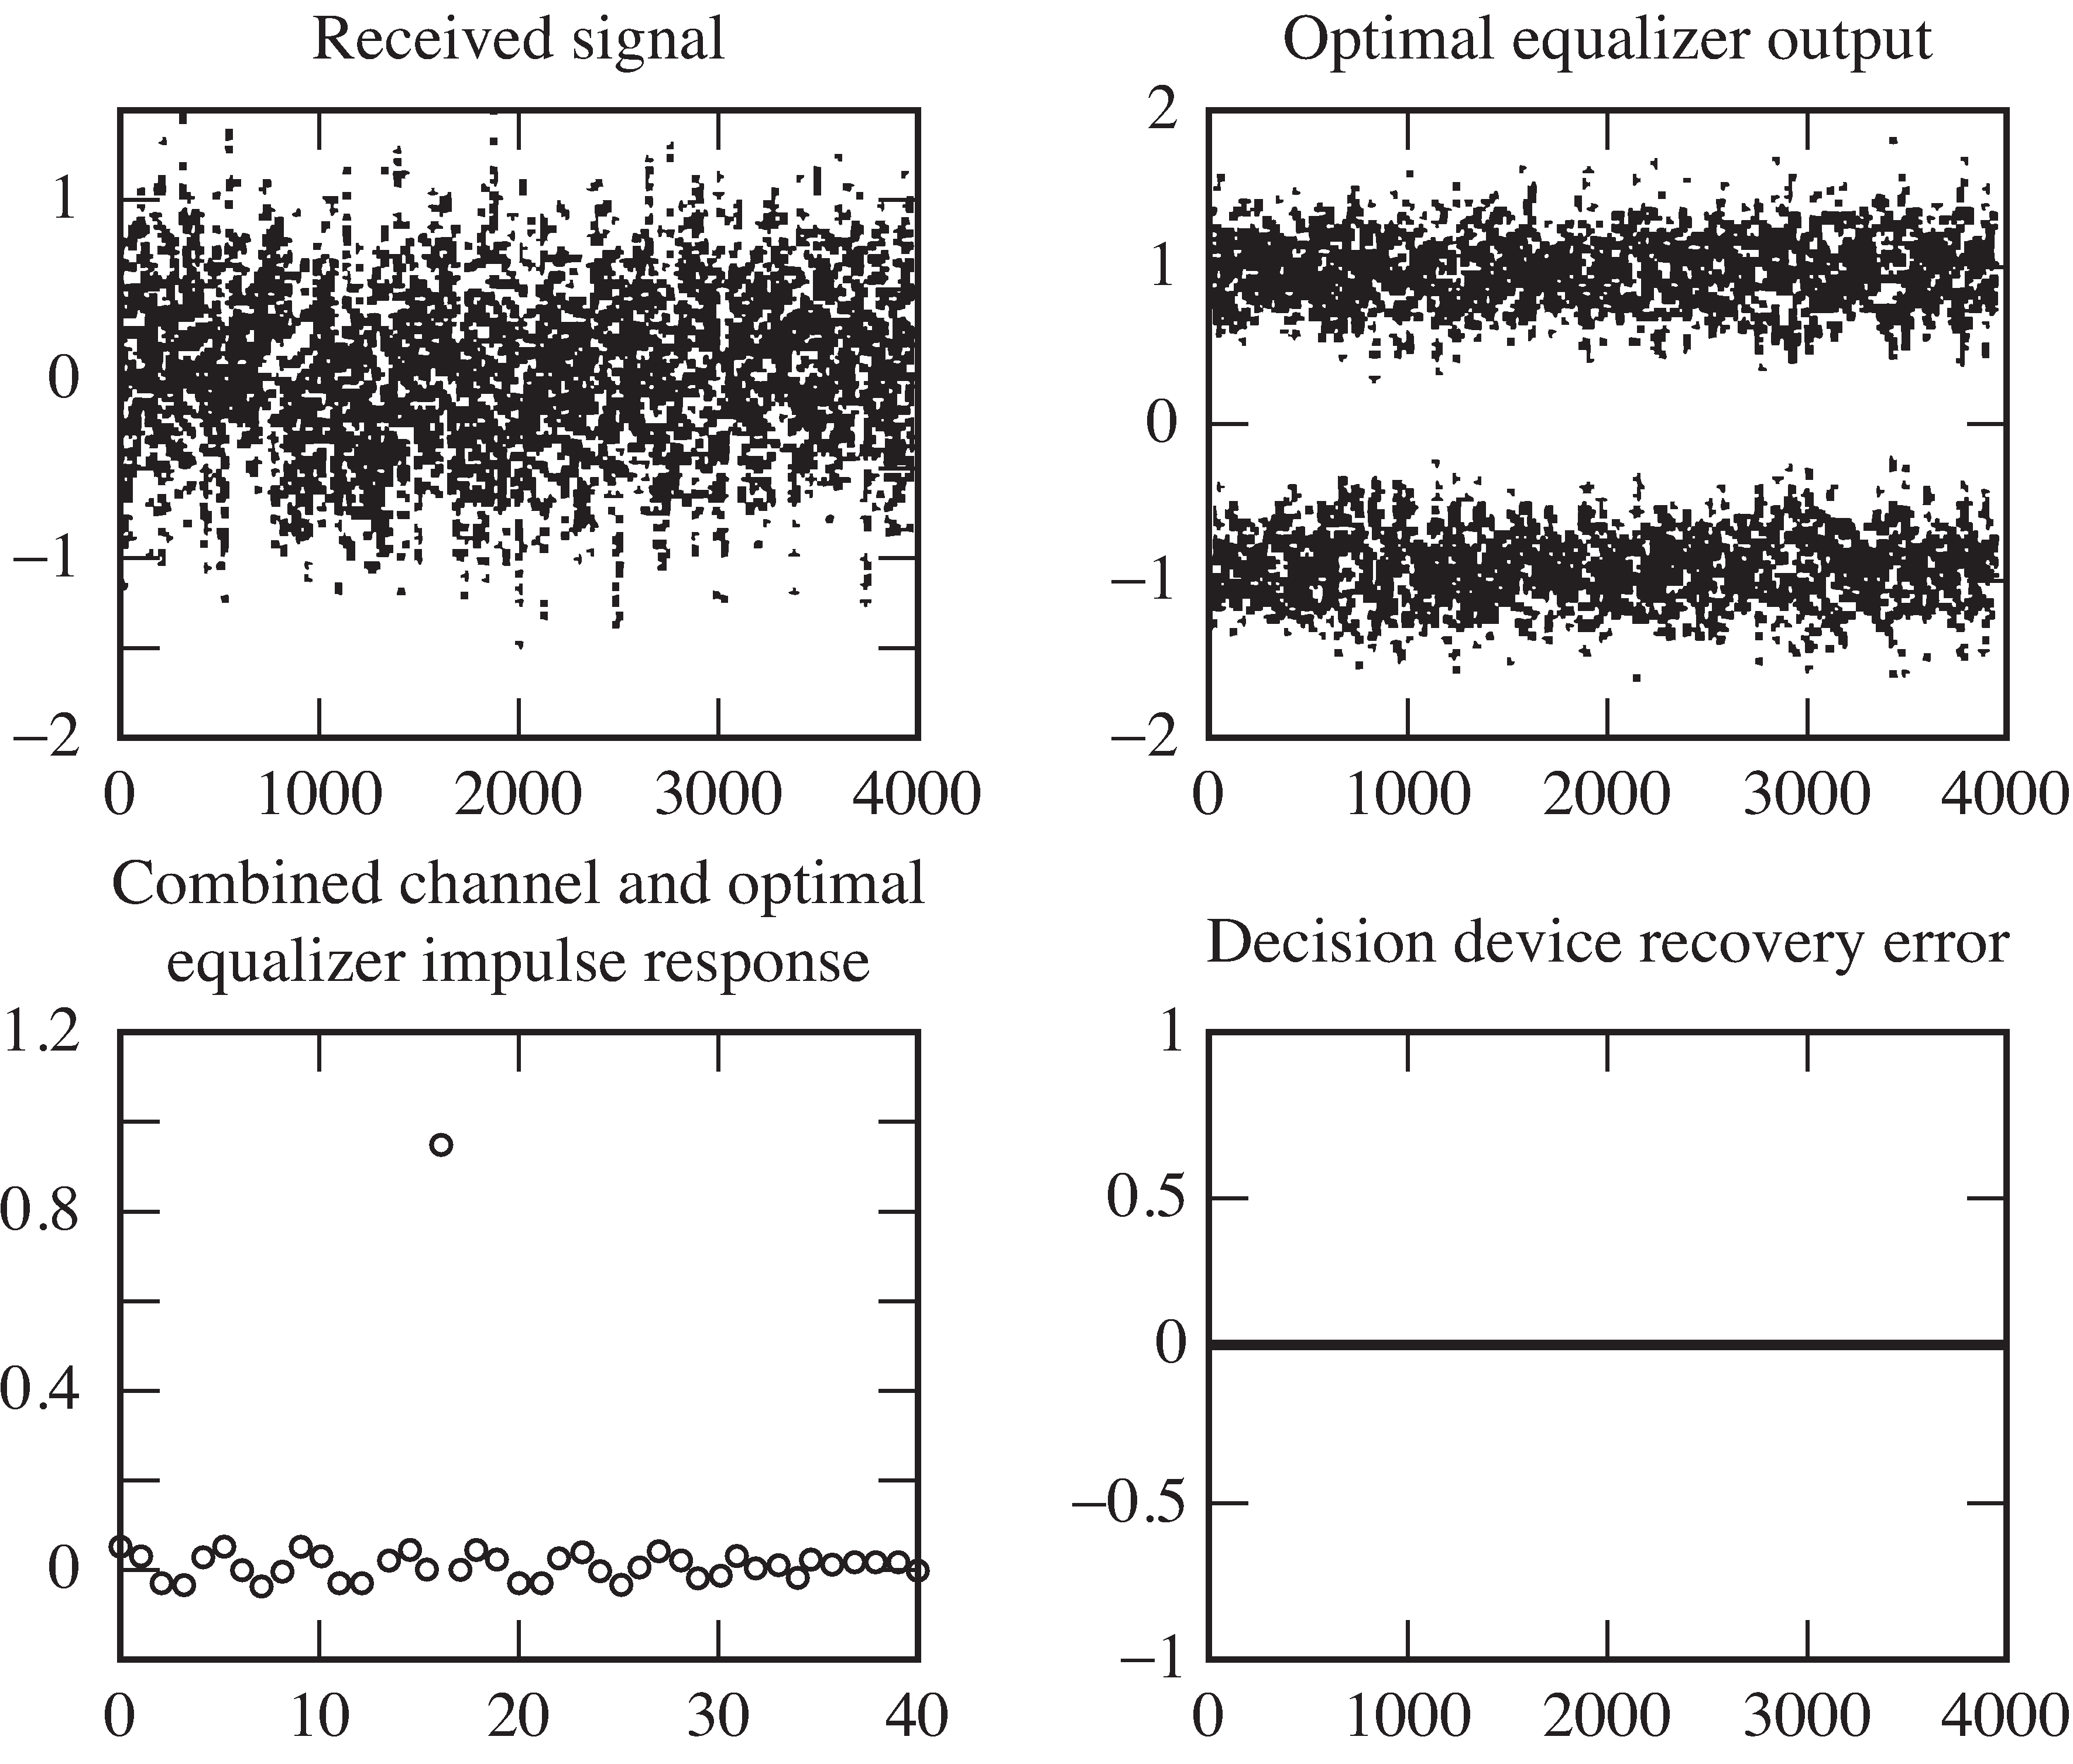 Trained least-squares equalizer for Channel 0: Time responses. The received signal is messy and cannot be used directly to recover the message. After passing through the optimal equalizer, there is sufficient separation to open the eye. The bottom left figure shows the impulse response of the channel convolved with the impulse response of the optimal equalizer, it is close to an ideal response (which would be one at one delay and zero everywhere else). The bottom right plot shows that the message signal is recovered without error.